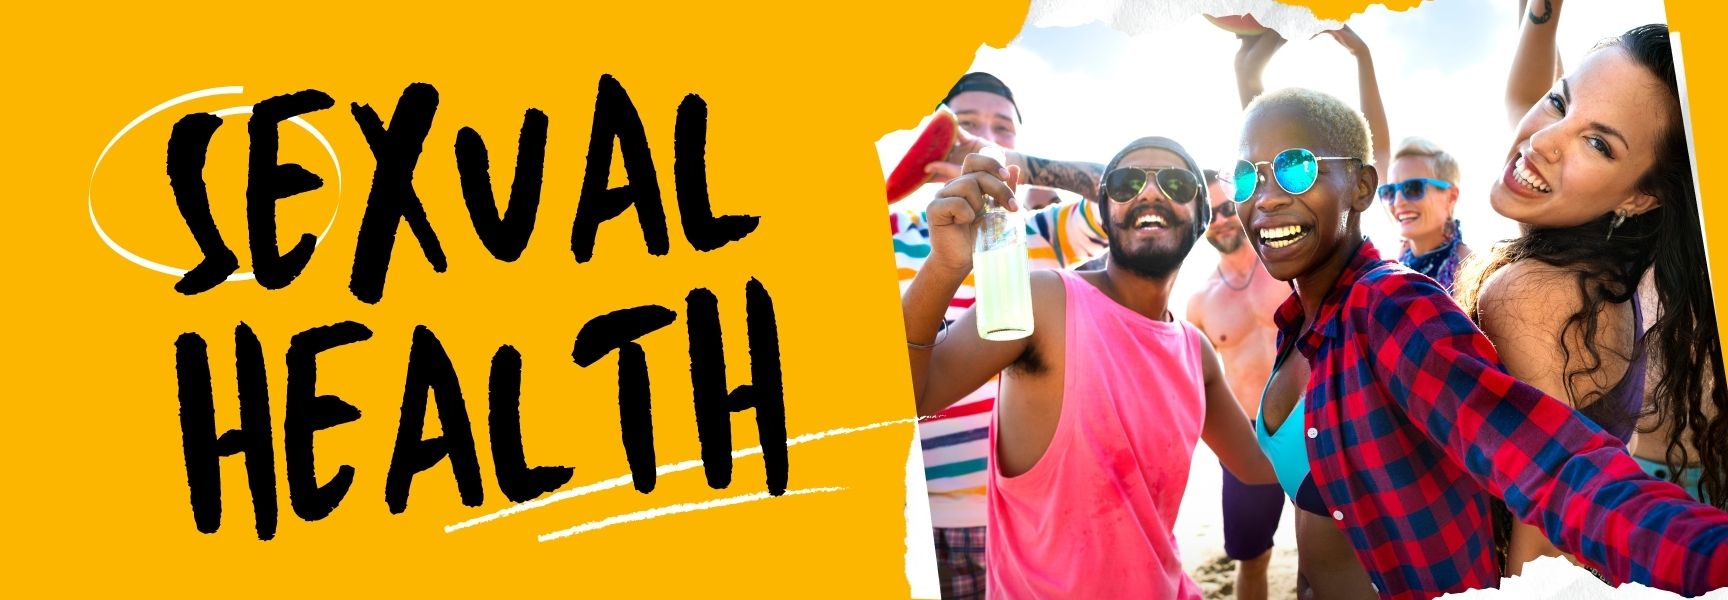 Sexual Health header with diverse people having fun